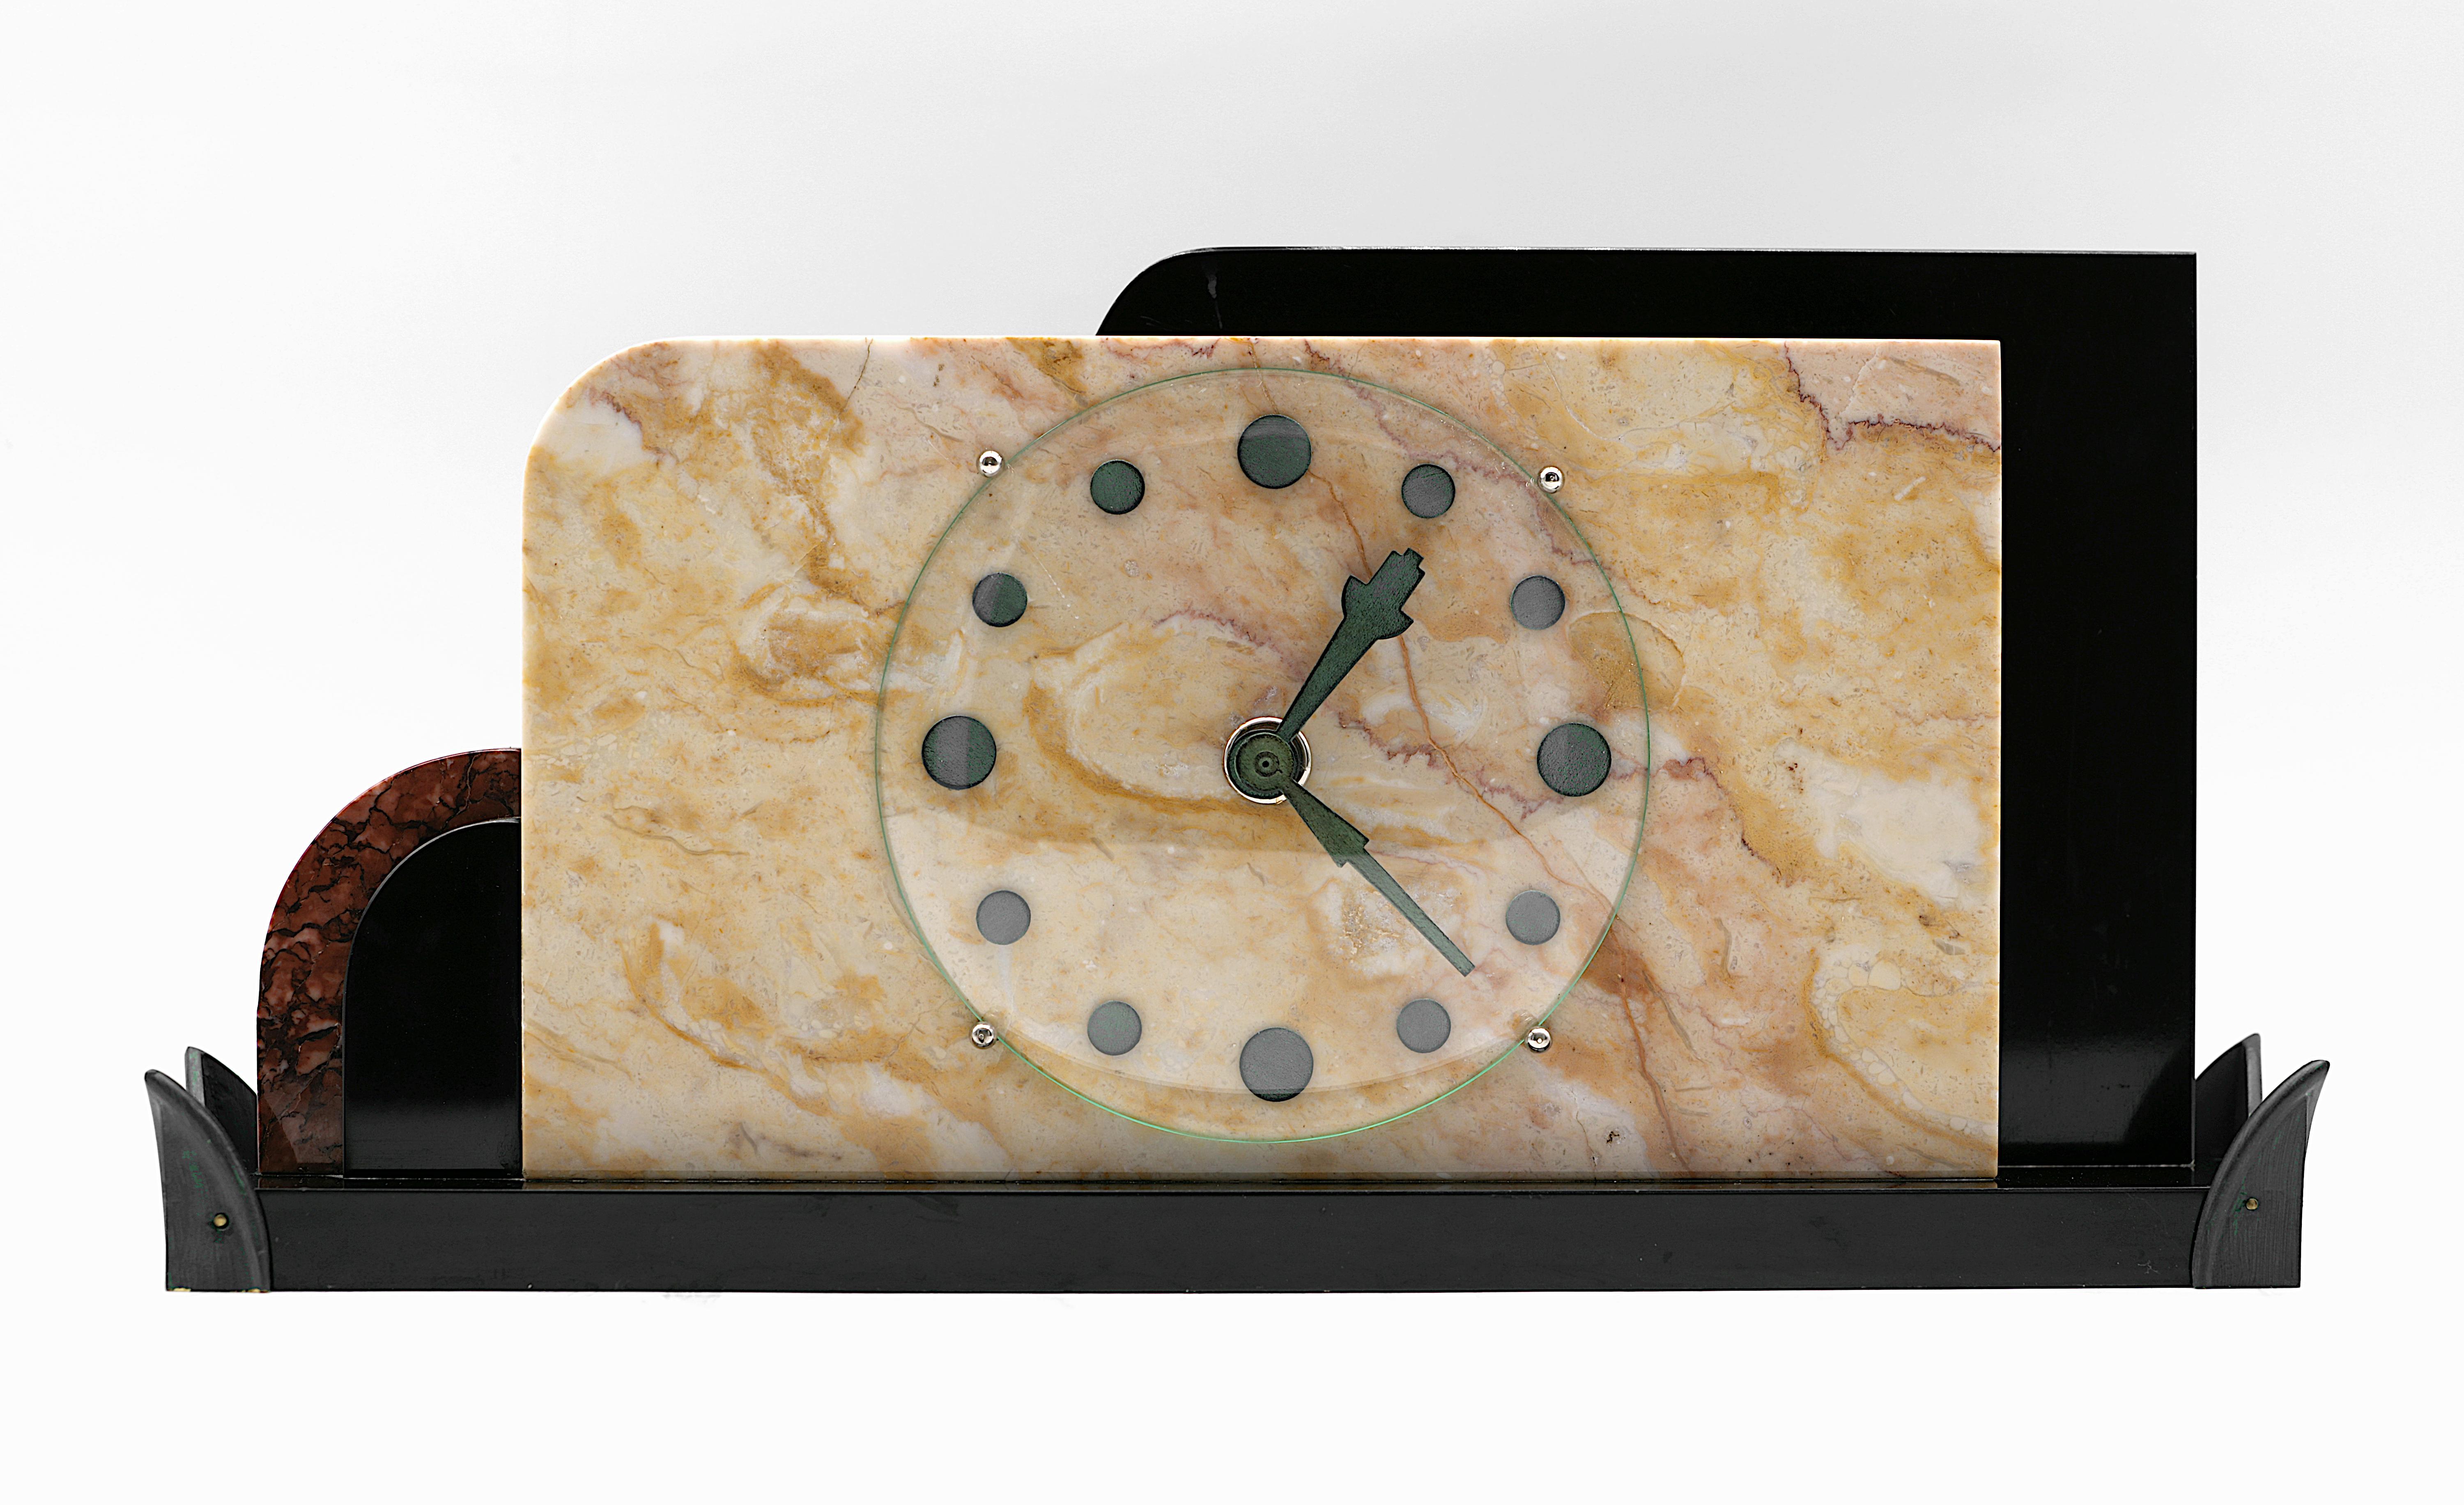 French Art Deco table / desk clock, France, ca.1930. Marble, glass and bronze. 8 days movement. Height: 8.5